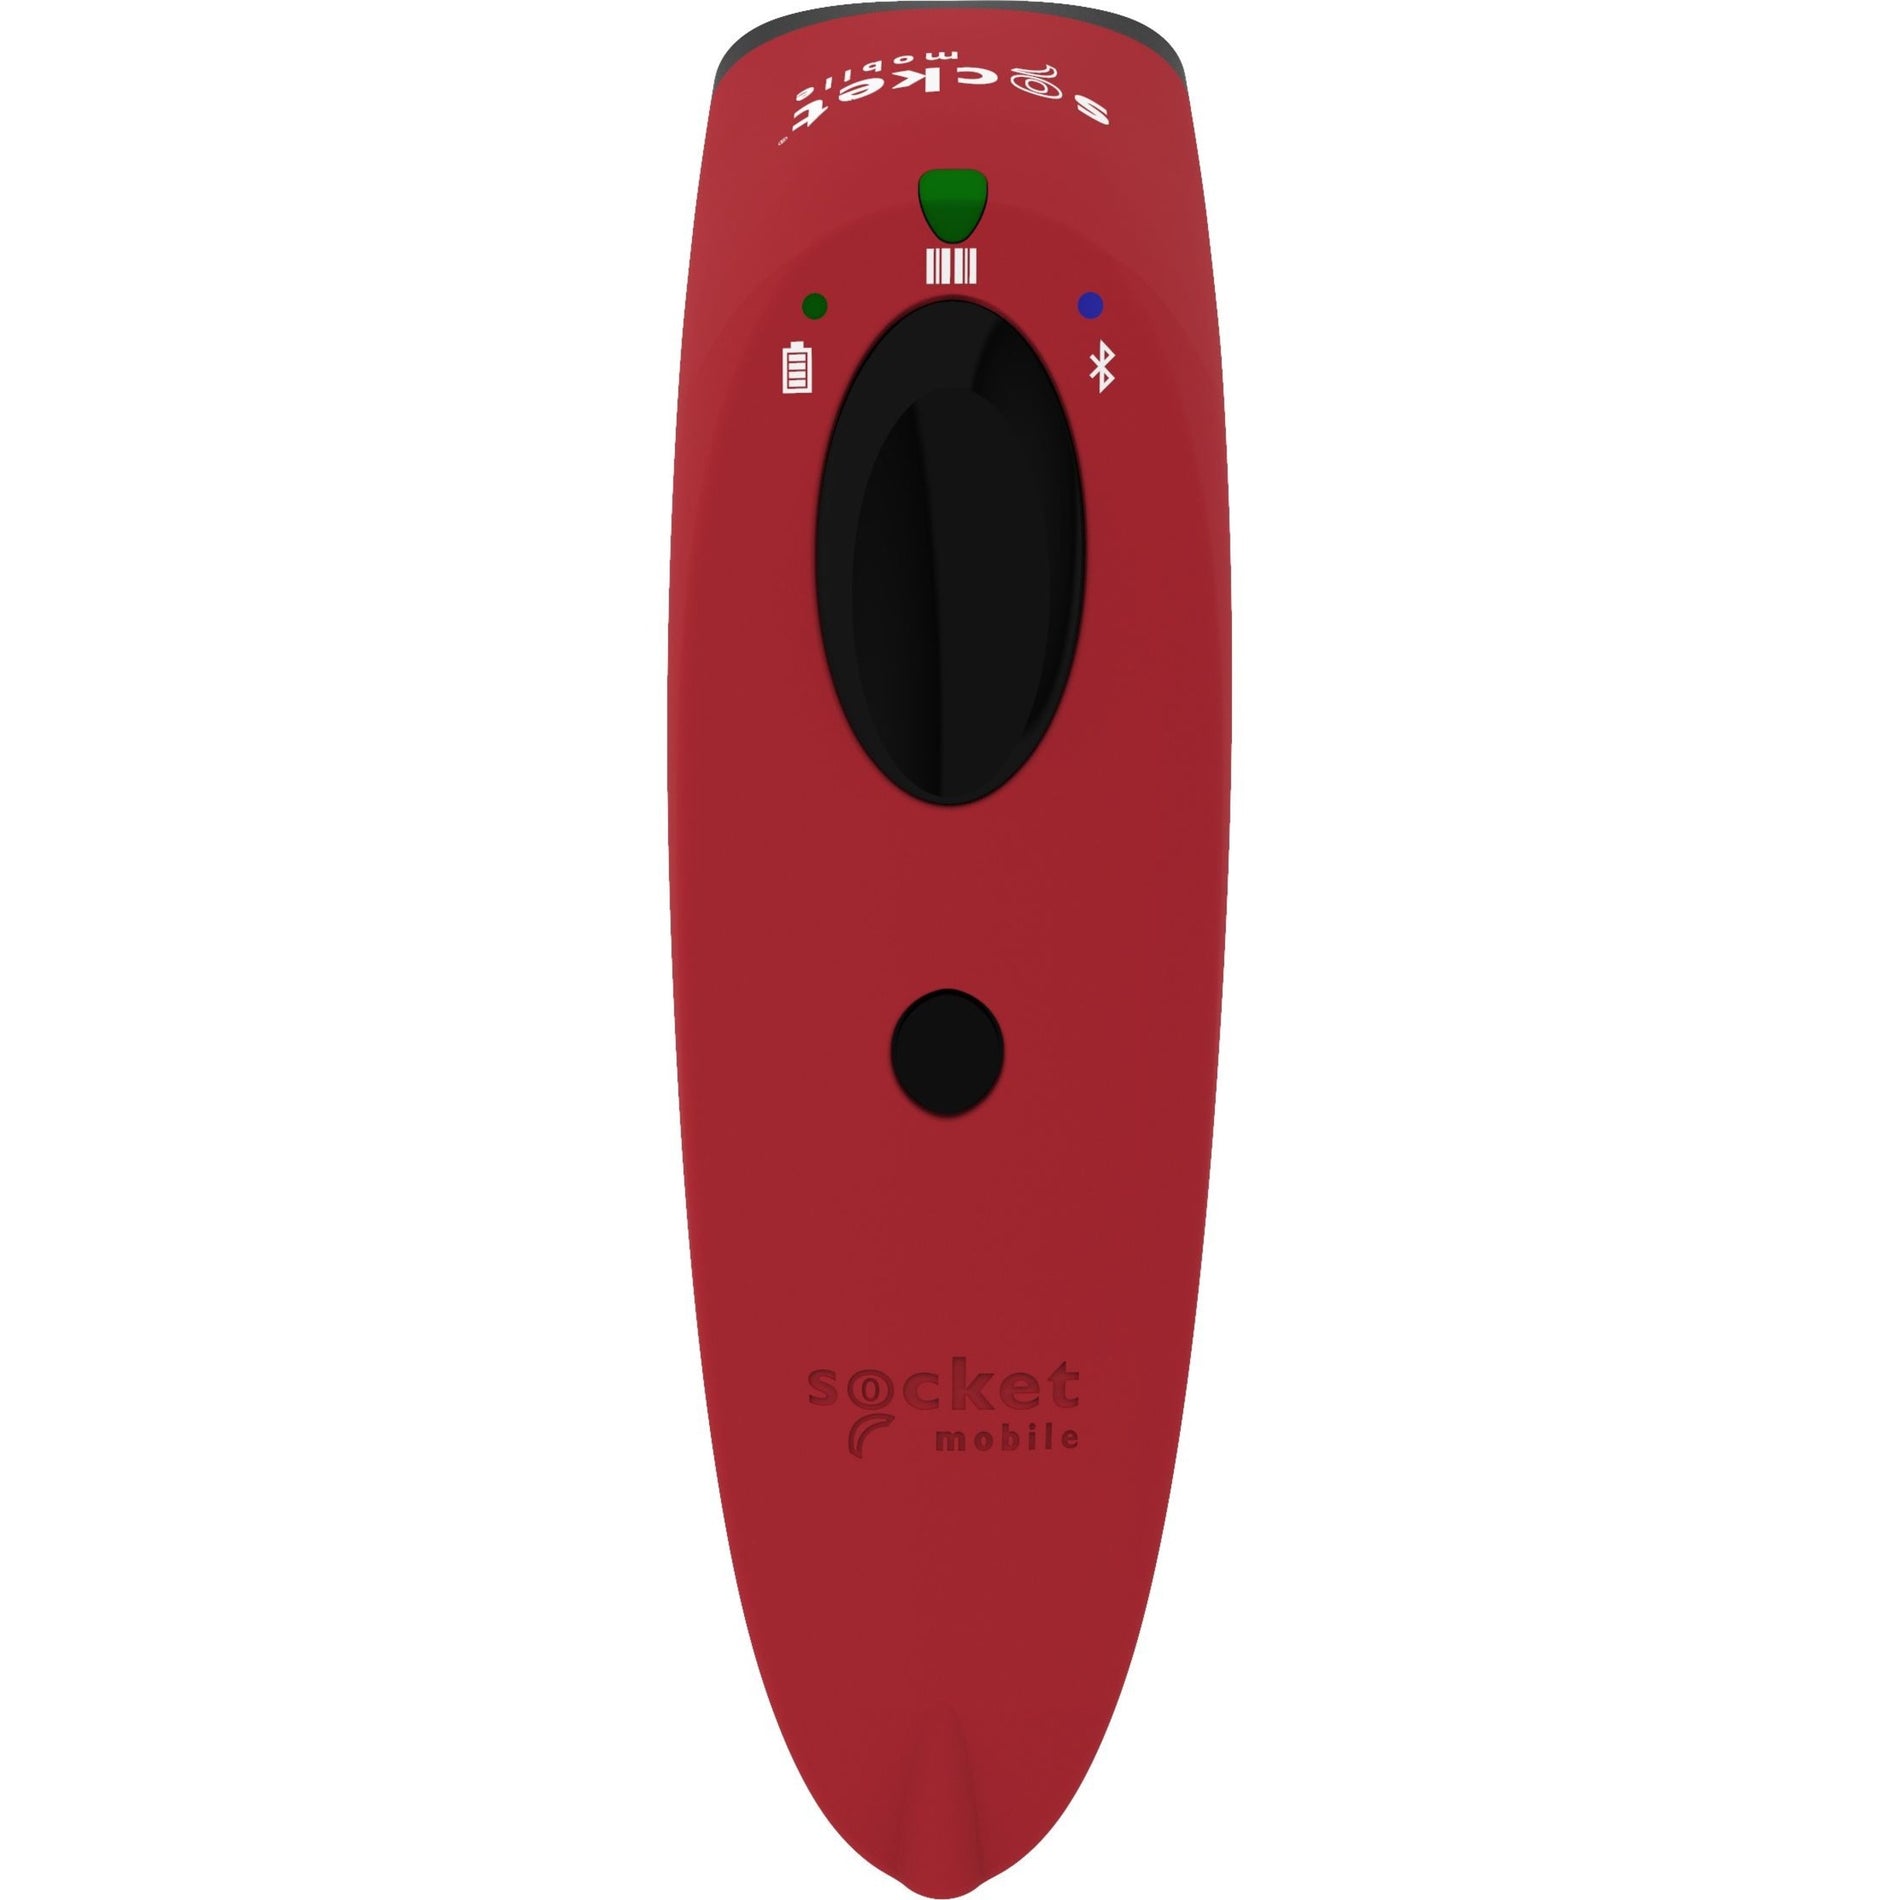 Socket Mobile CX3976-3033 SocketScan S720 Red Barcode Plus QR Code Reader, Wireless, 2D/1D Scanning, iOS/Android/Mac/PC Compatible